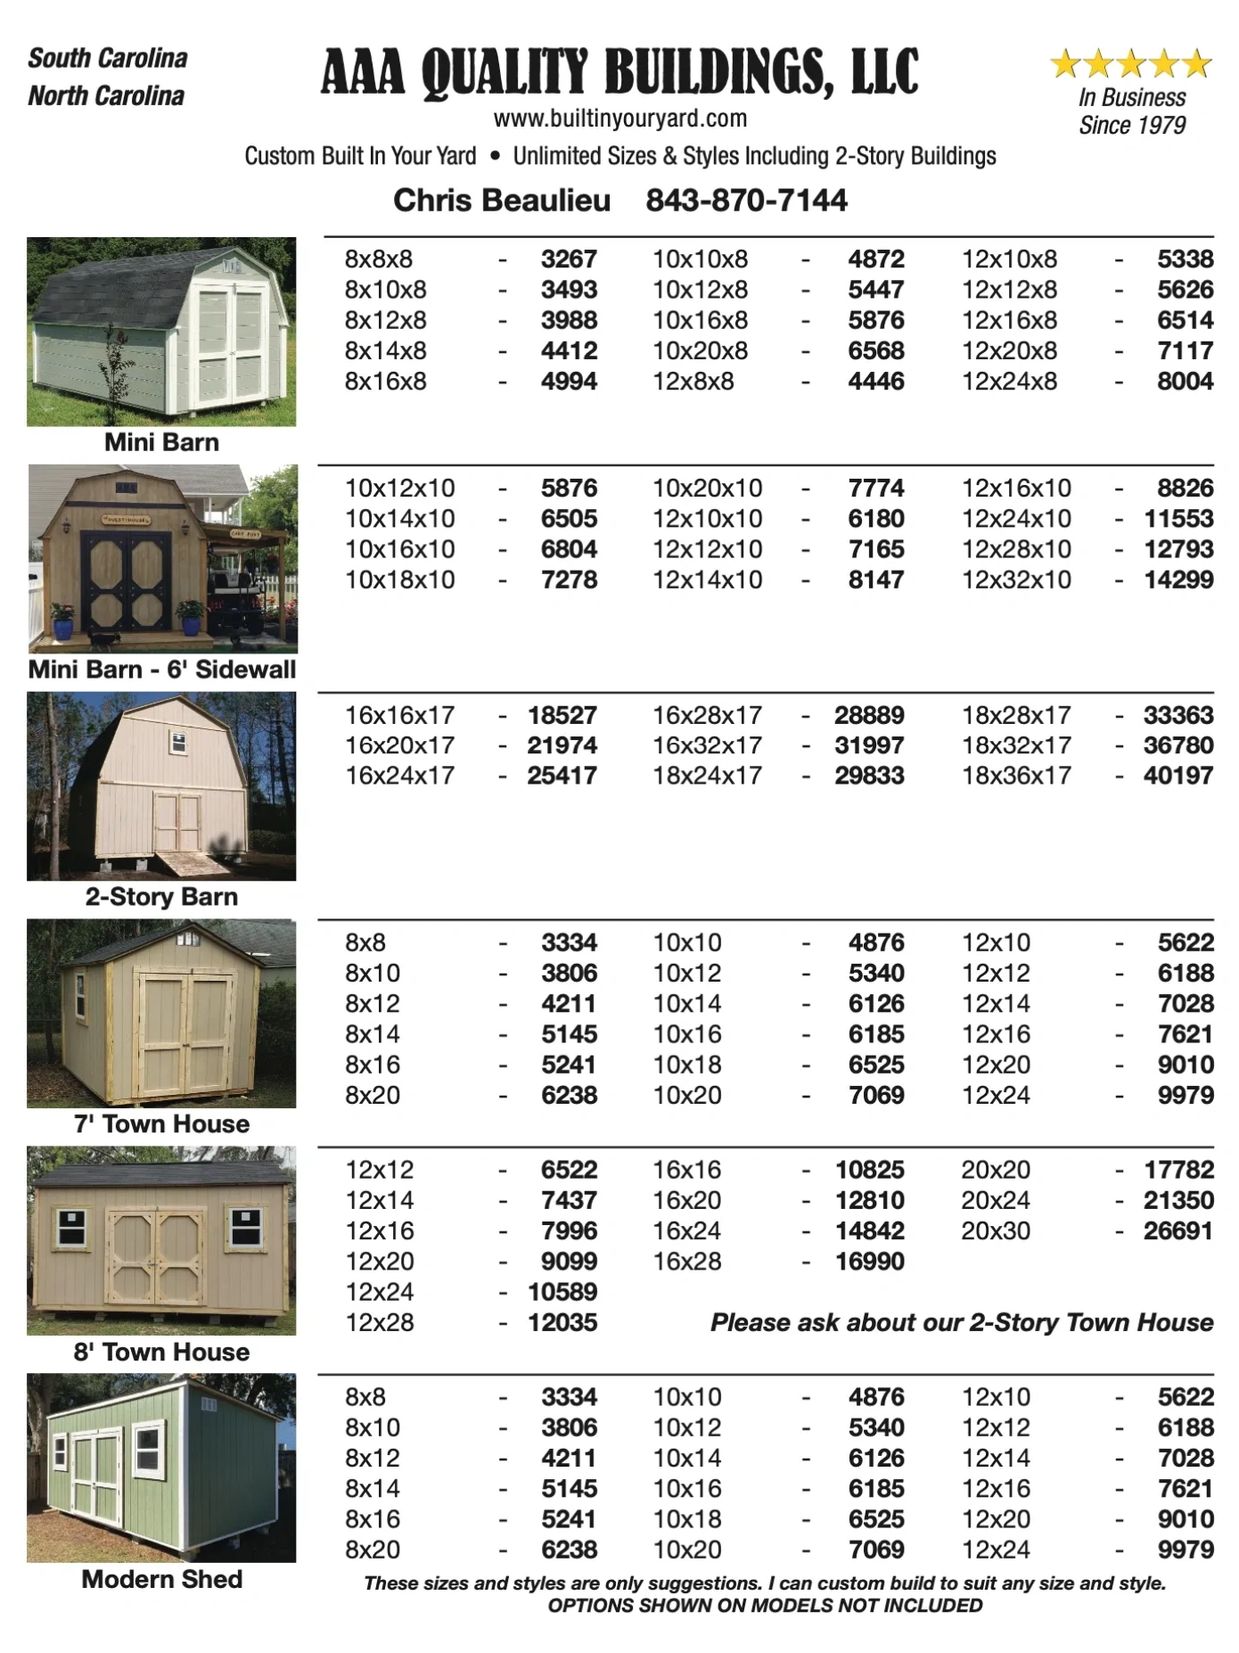 Prices for sheds and barns